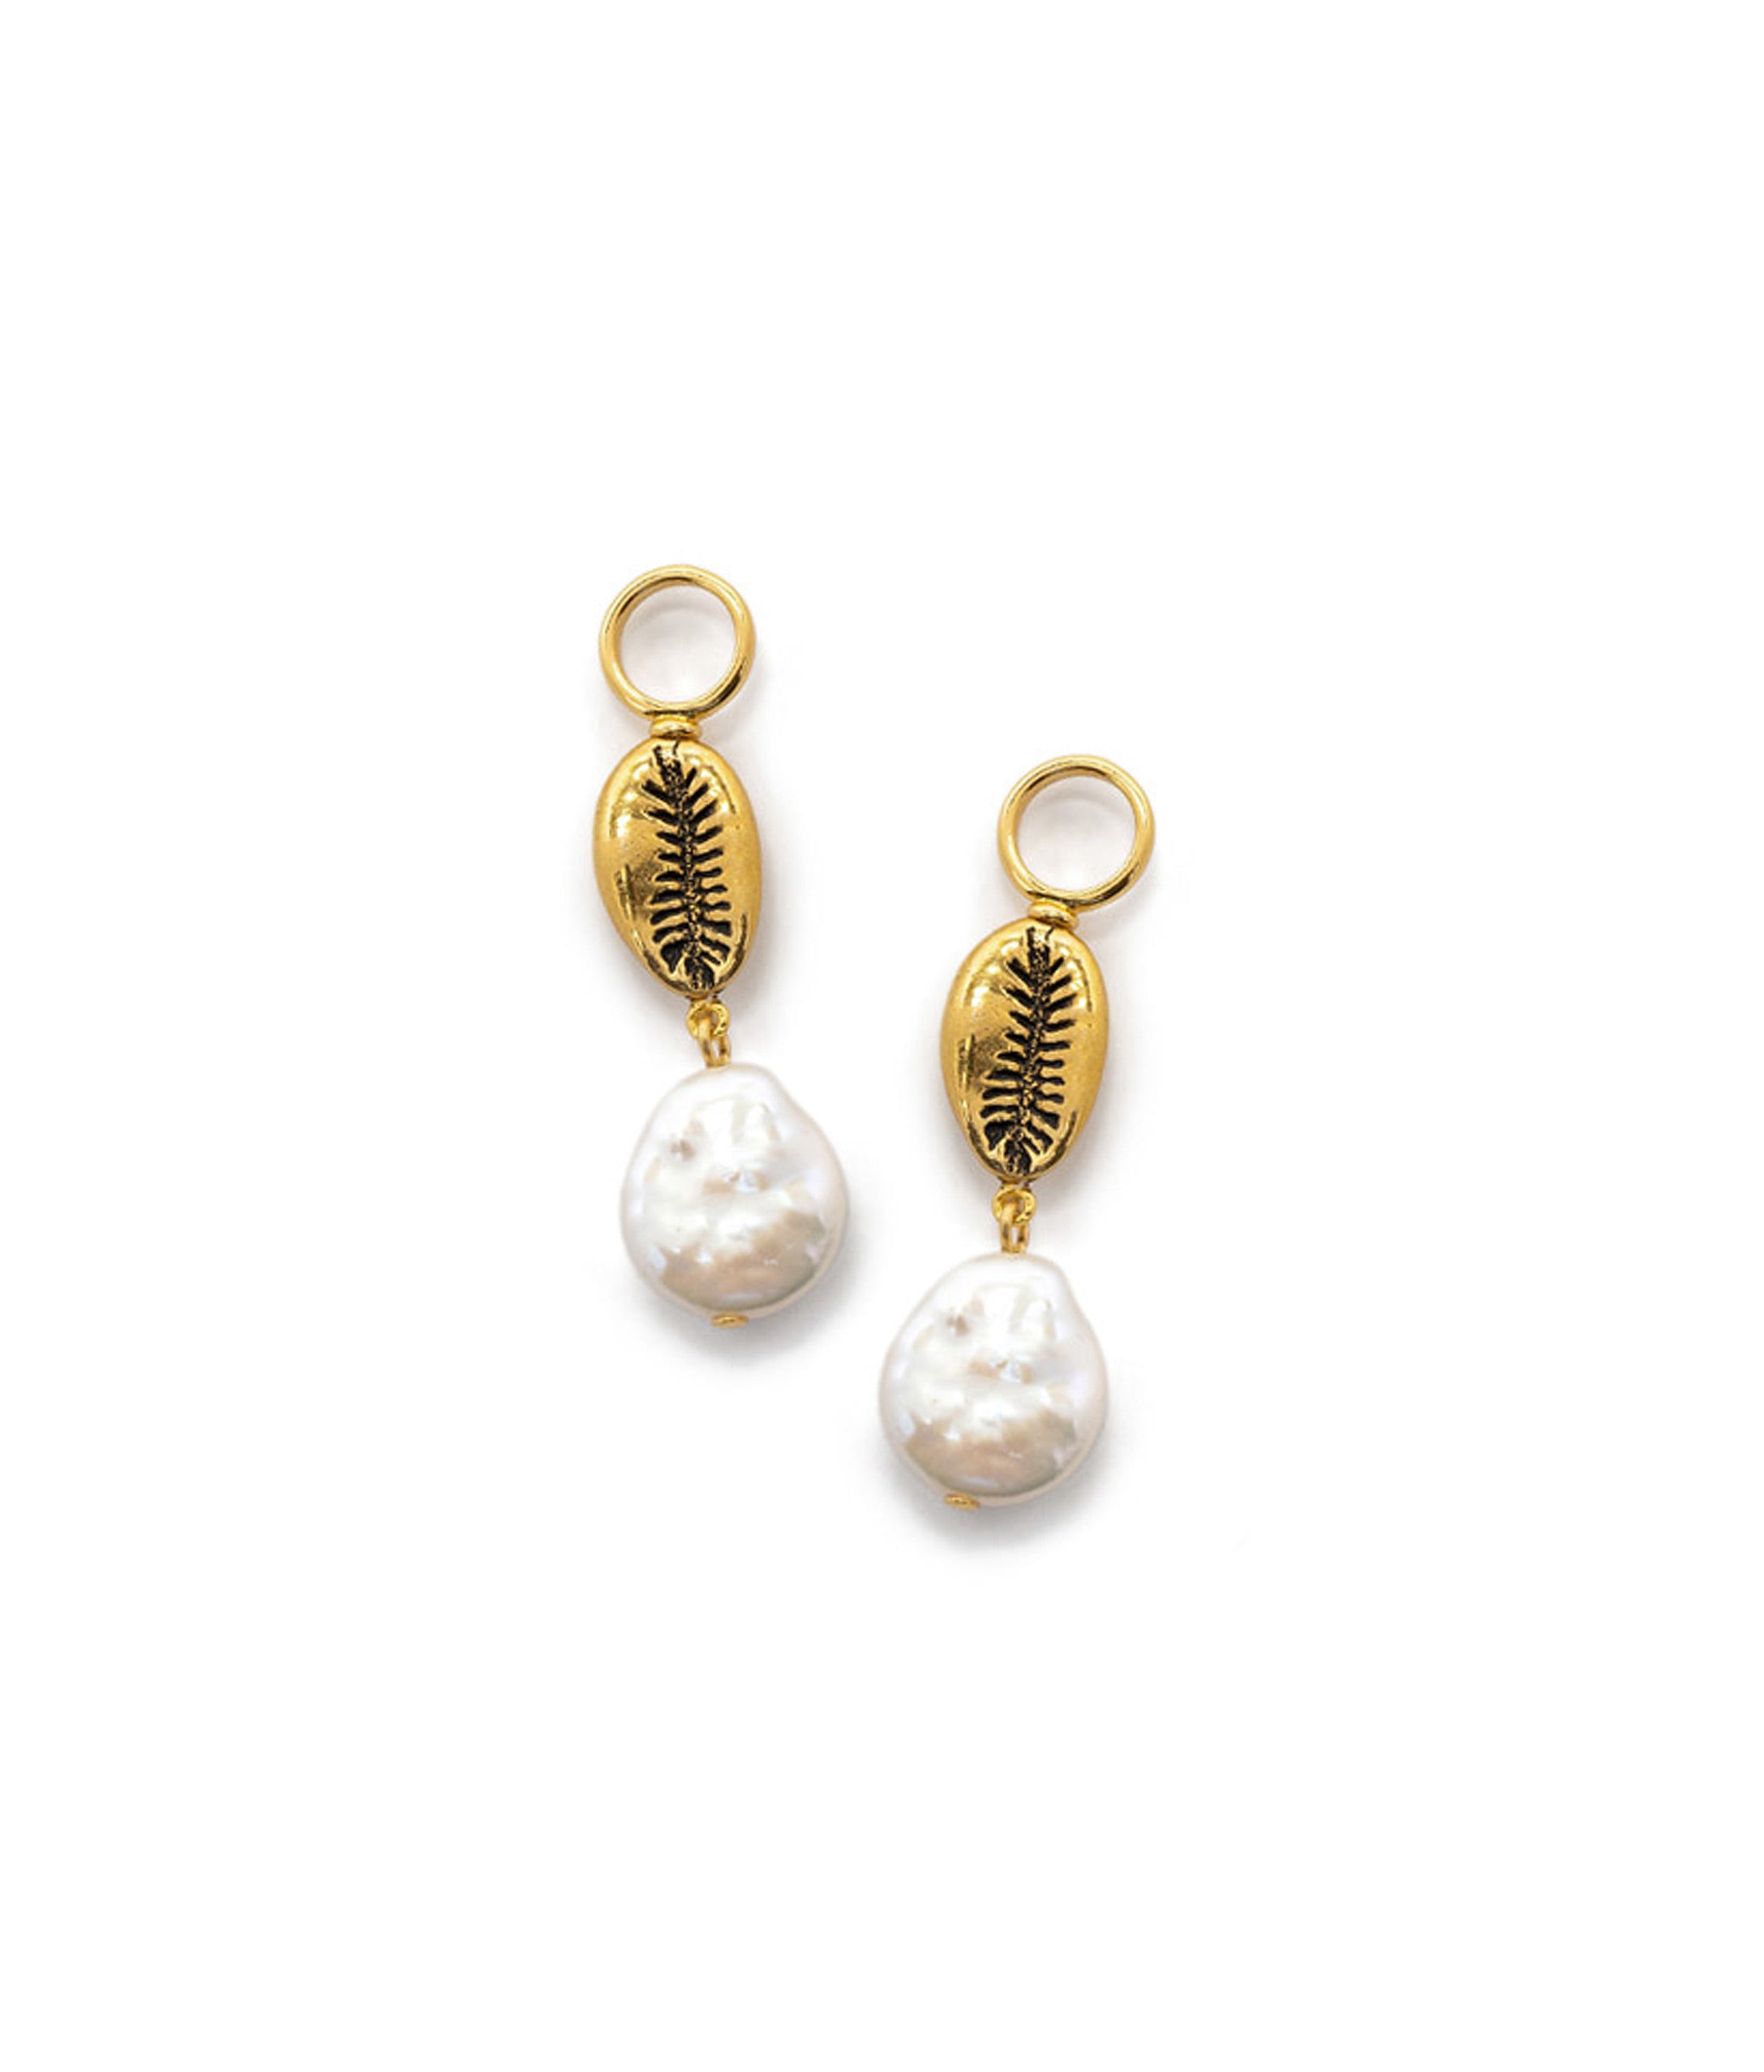 Tiny Treasure Charm. Two charms with antique brass shell, cultured pearl drop and gold-plated brass ring.